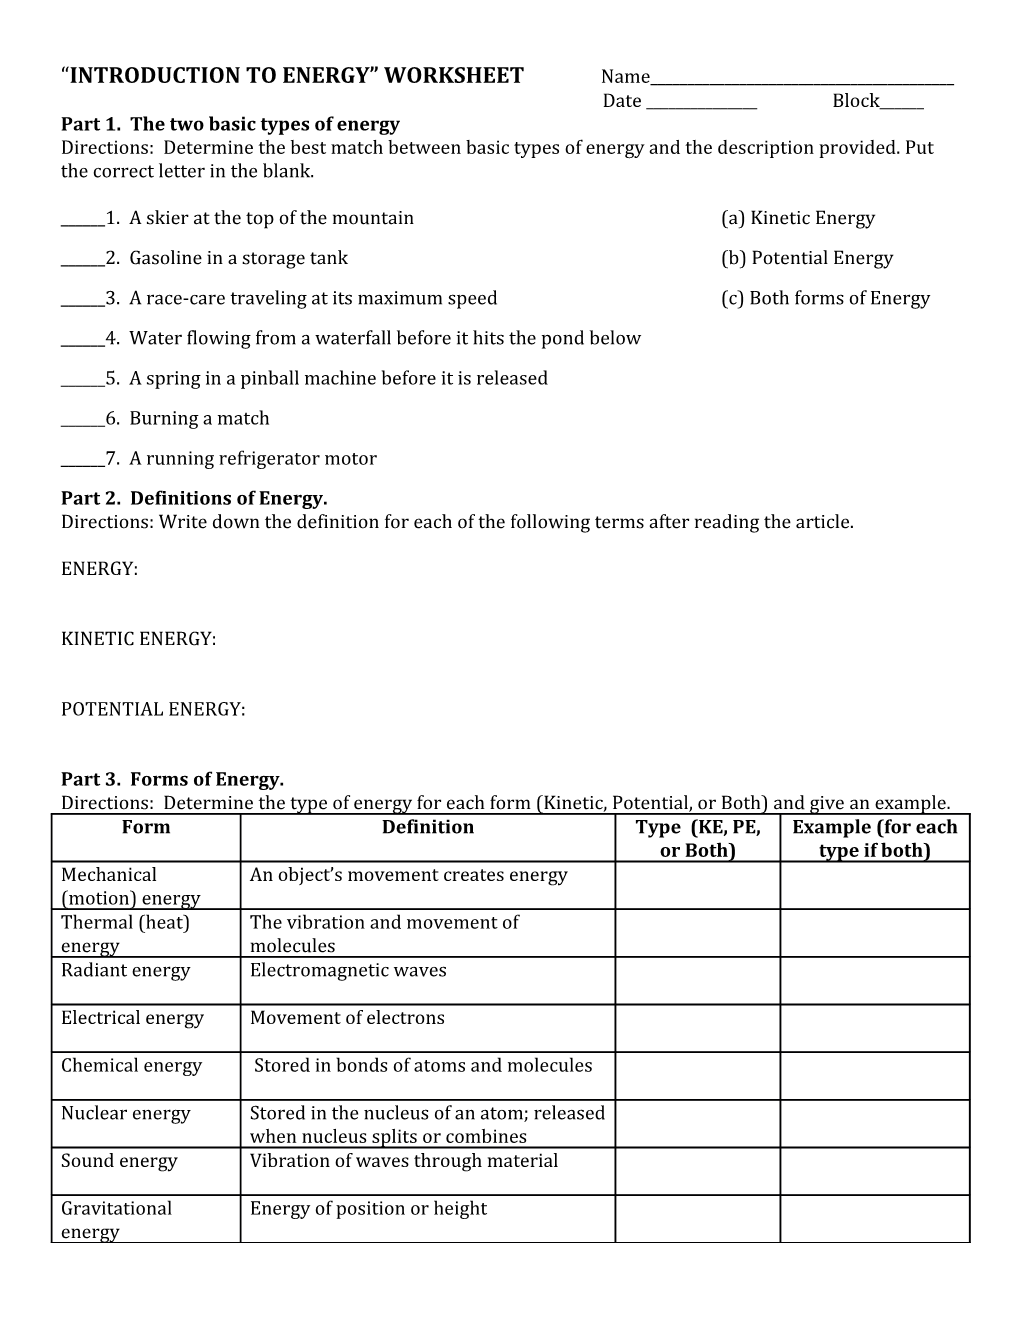 Introduction to Energy Worksheet s1